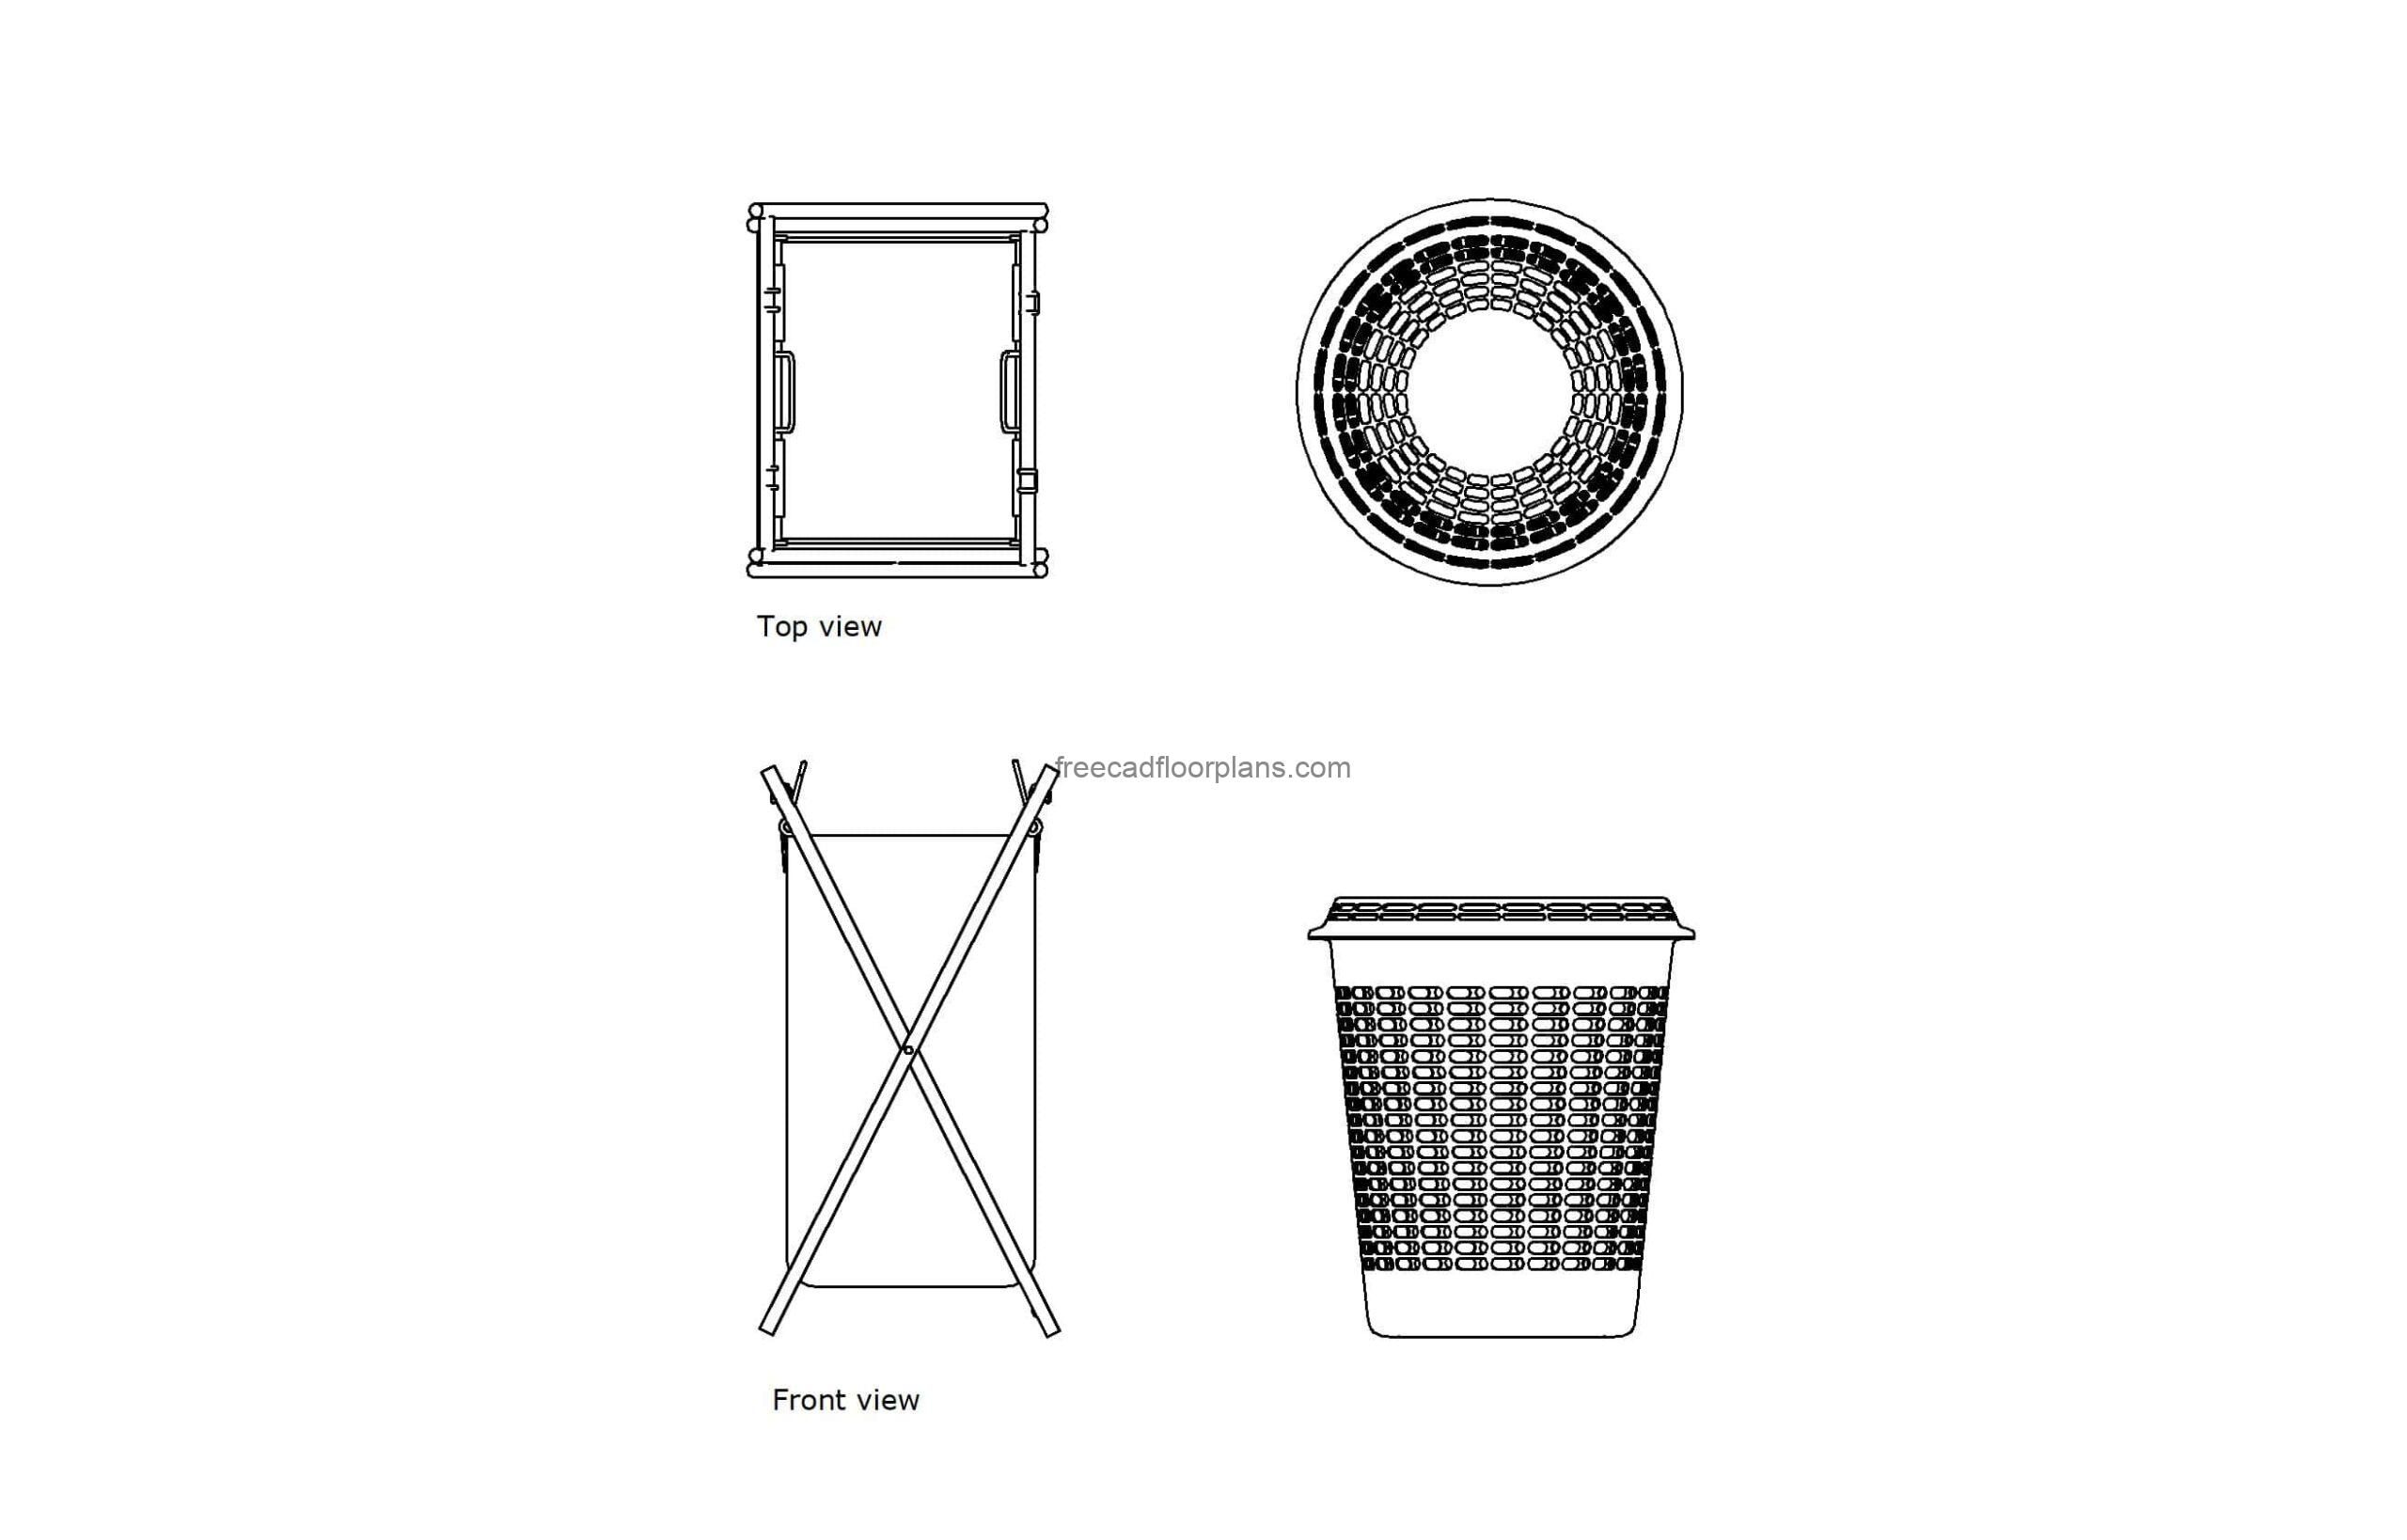 autocad drawing of two laundry hampers, plan and elevation 2d views, dwg file free for download